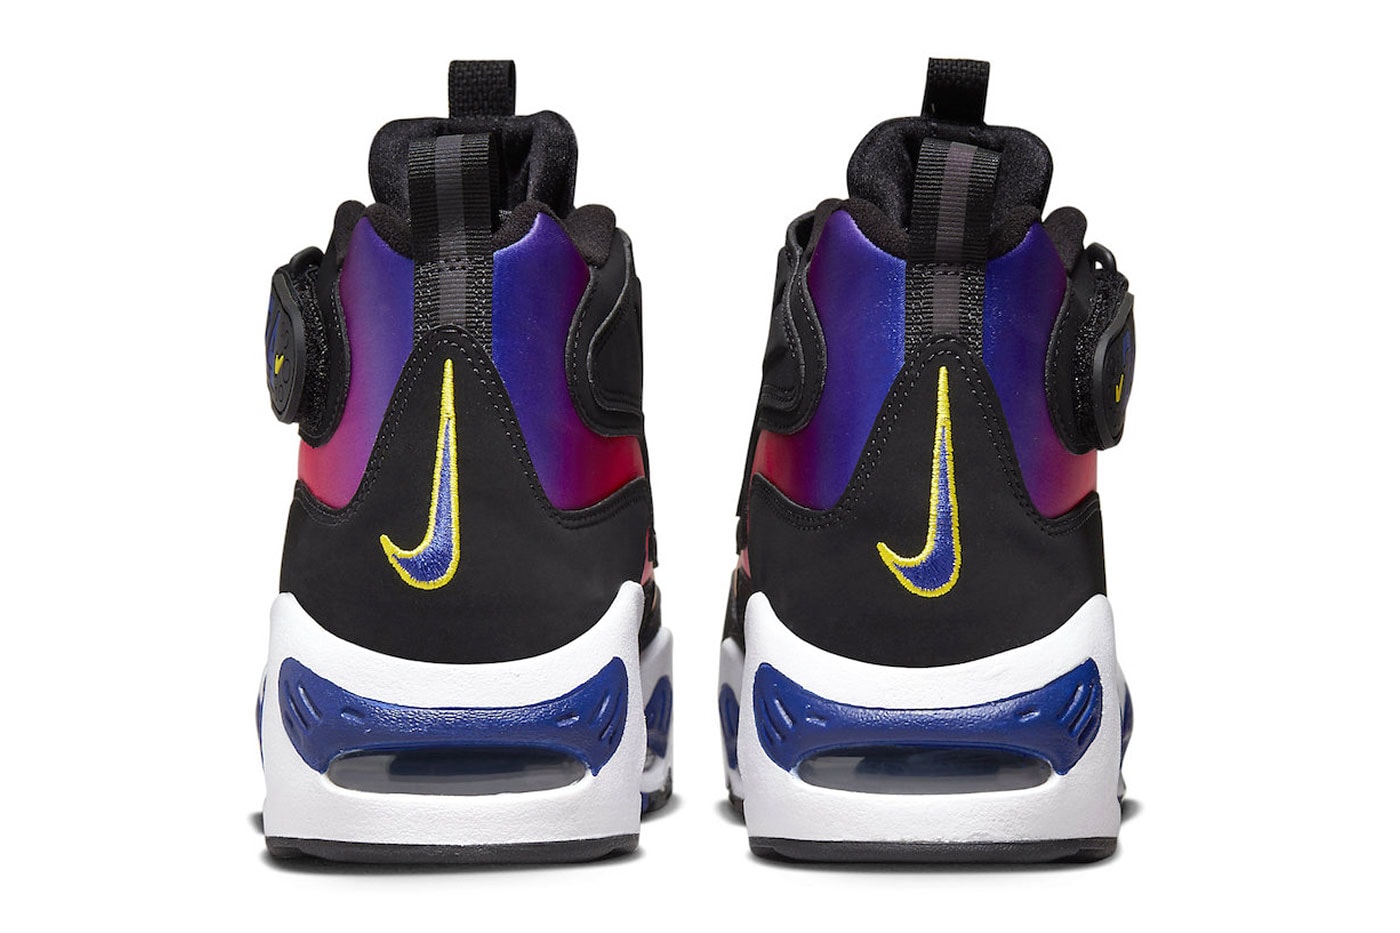 Take an Official Look at the Nike Air Griffey Max 1 "Los Angeles" DV3353-001 la blue yellow la rams dodgers purple lakers